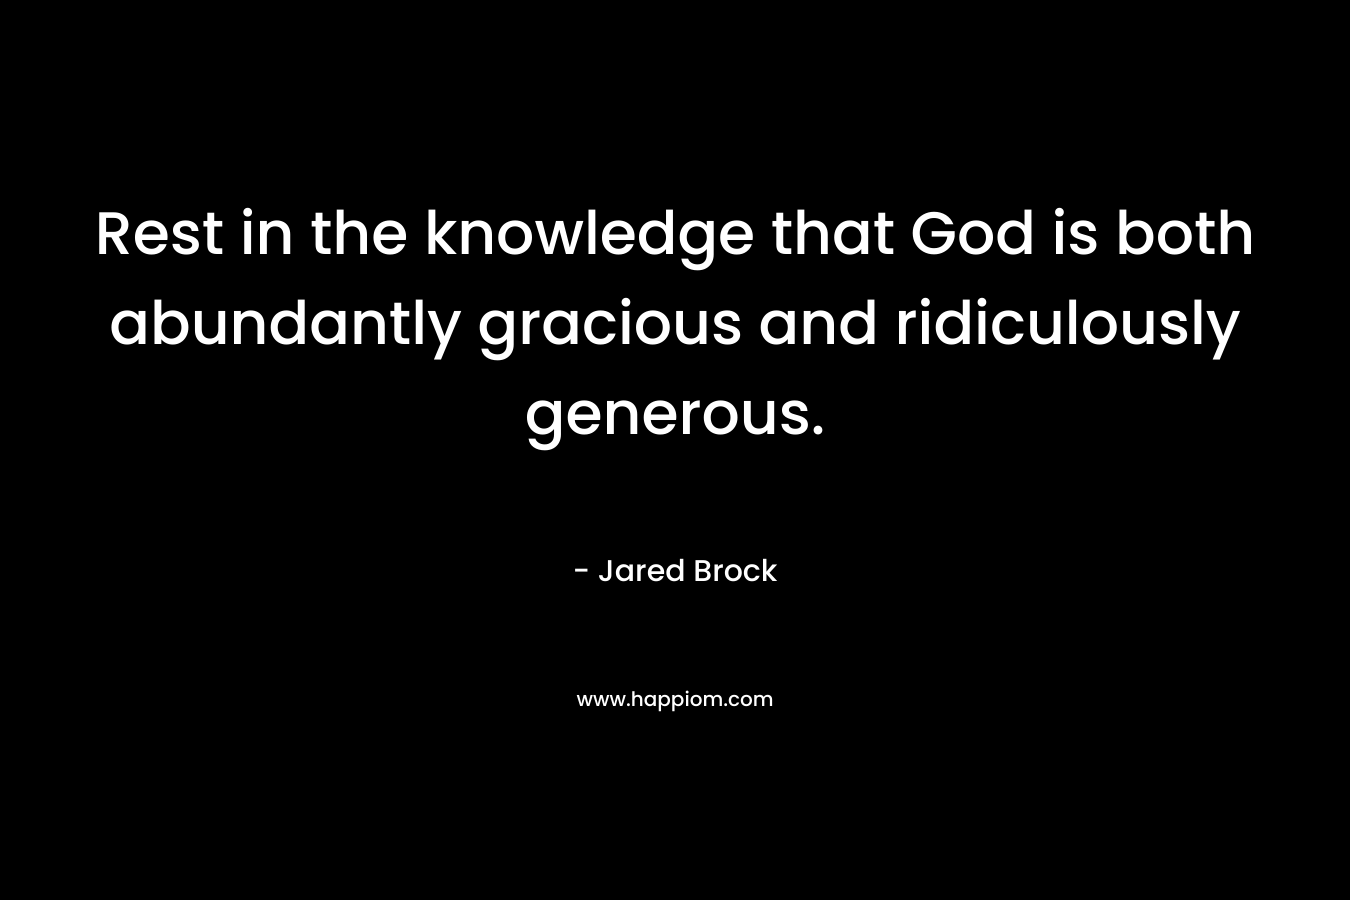 Rest in the knowledge that God is both abundantly gracious and ridiculously generous.